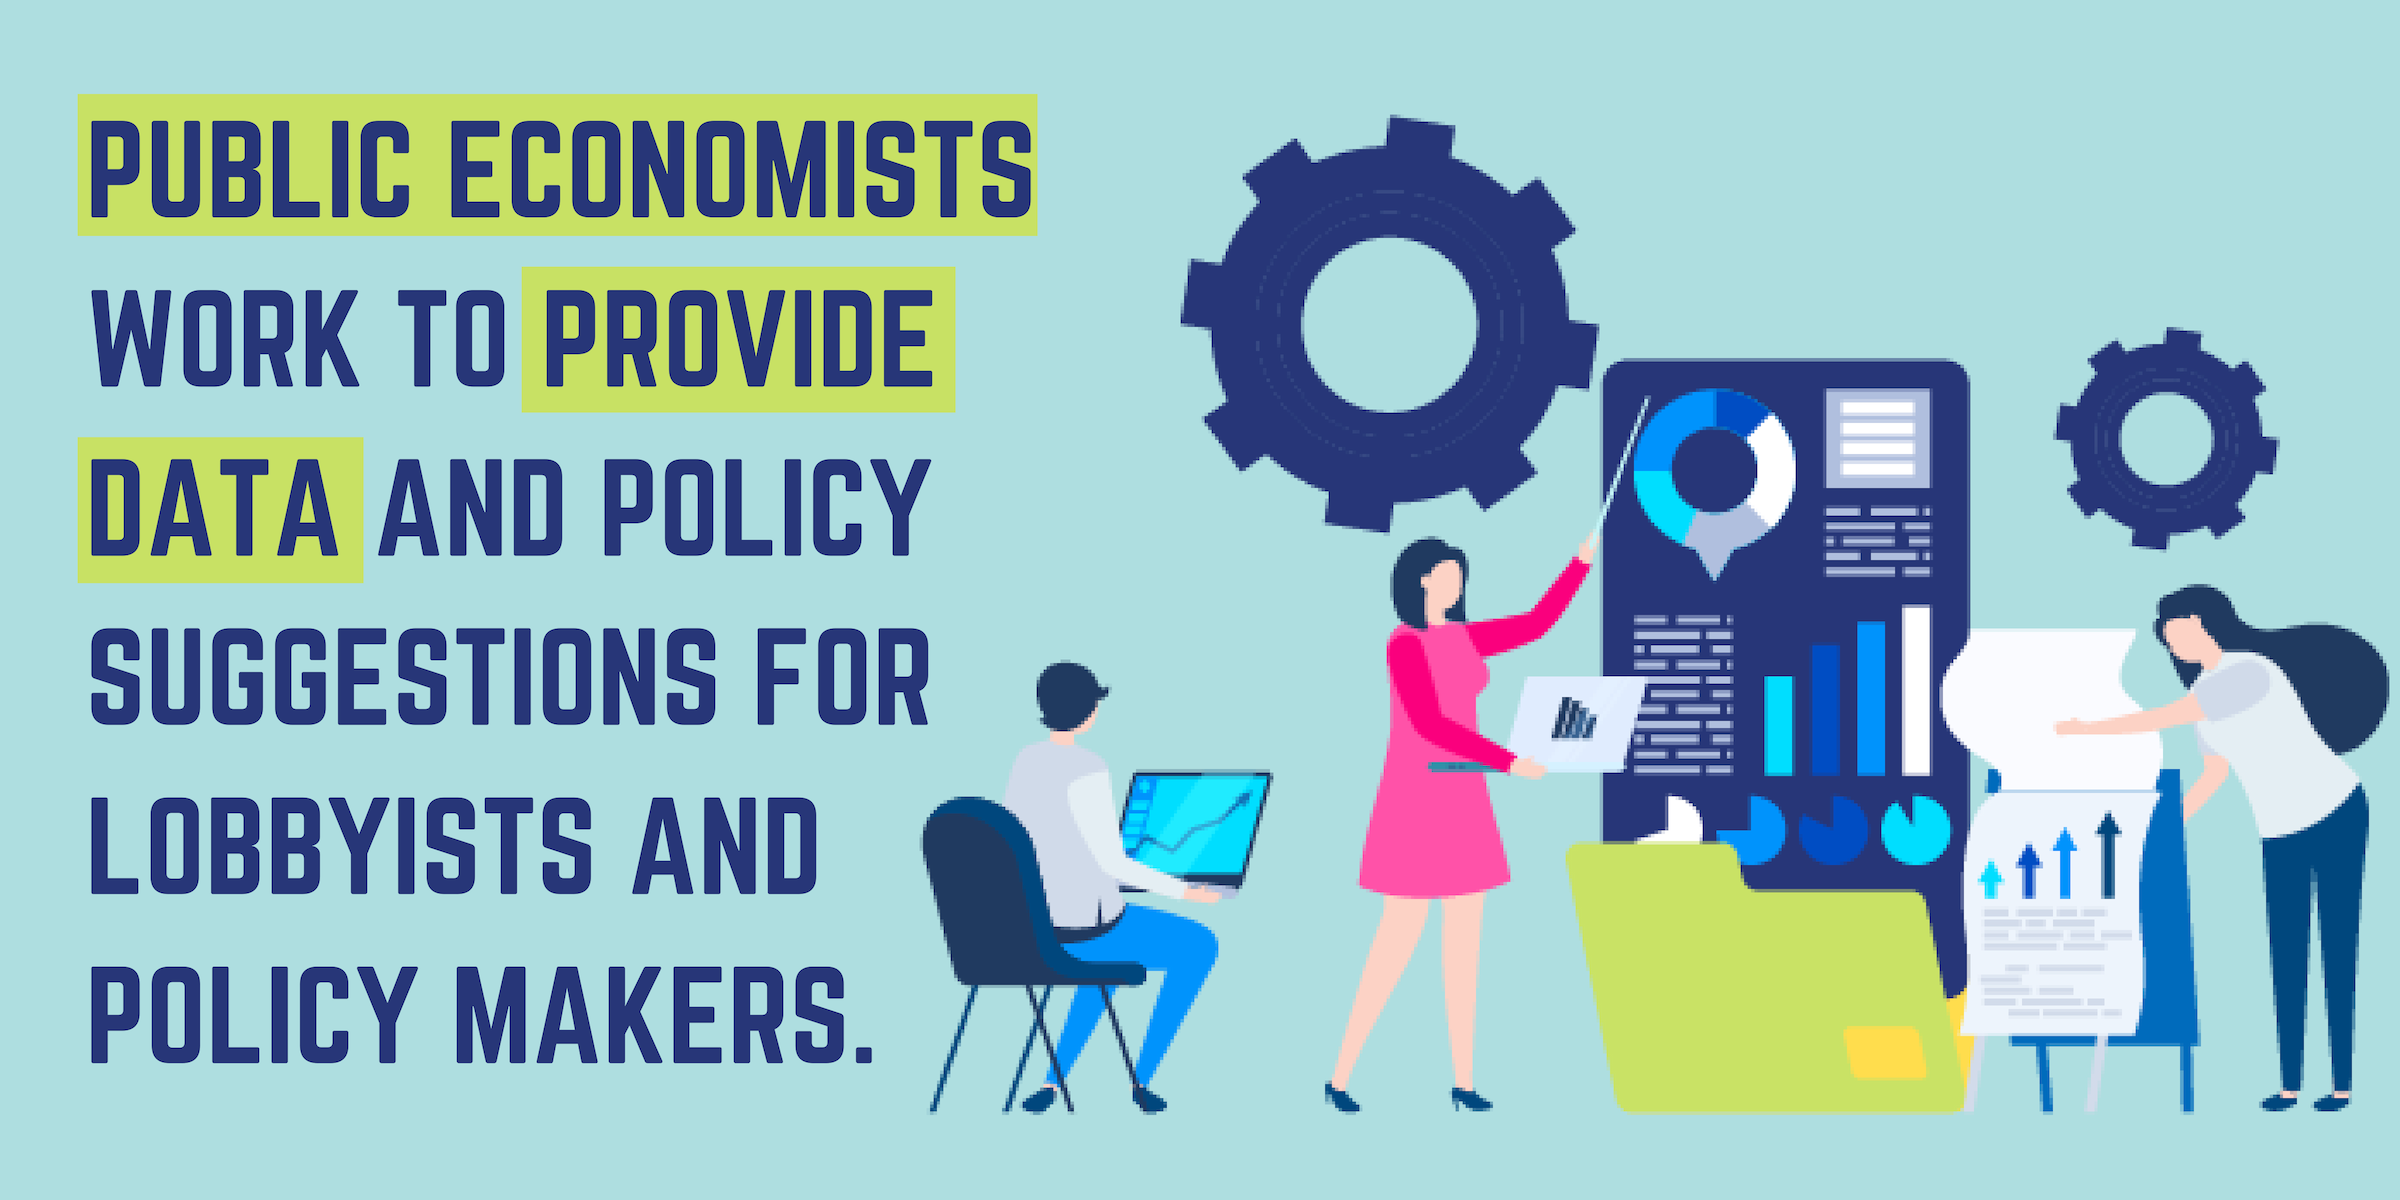 Public Economists work to provide data and policy suggestions for lobbyists and policy makers.